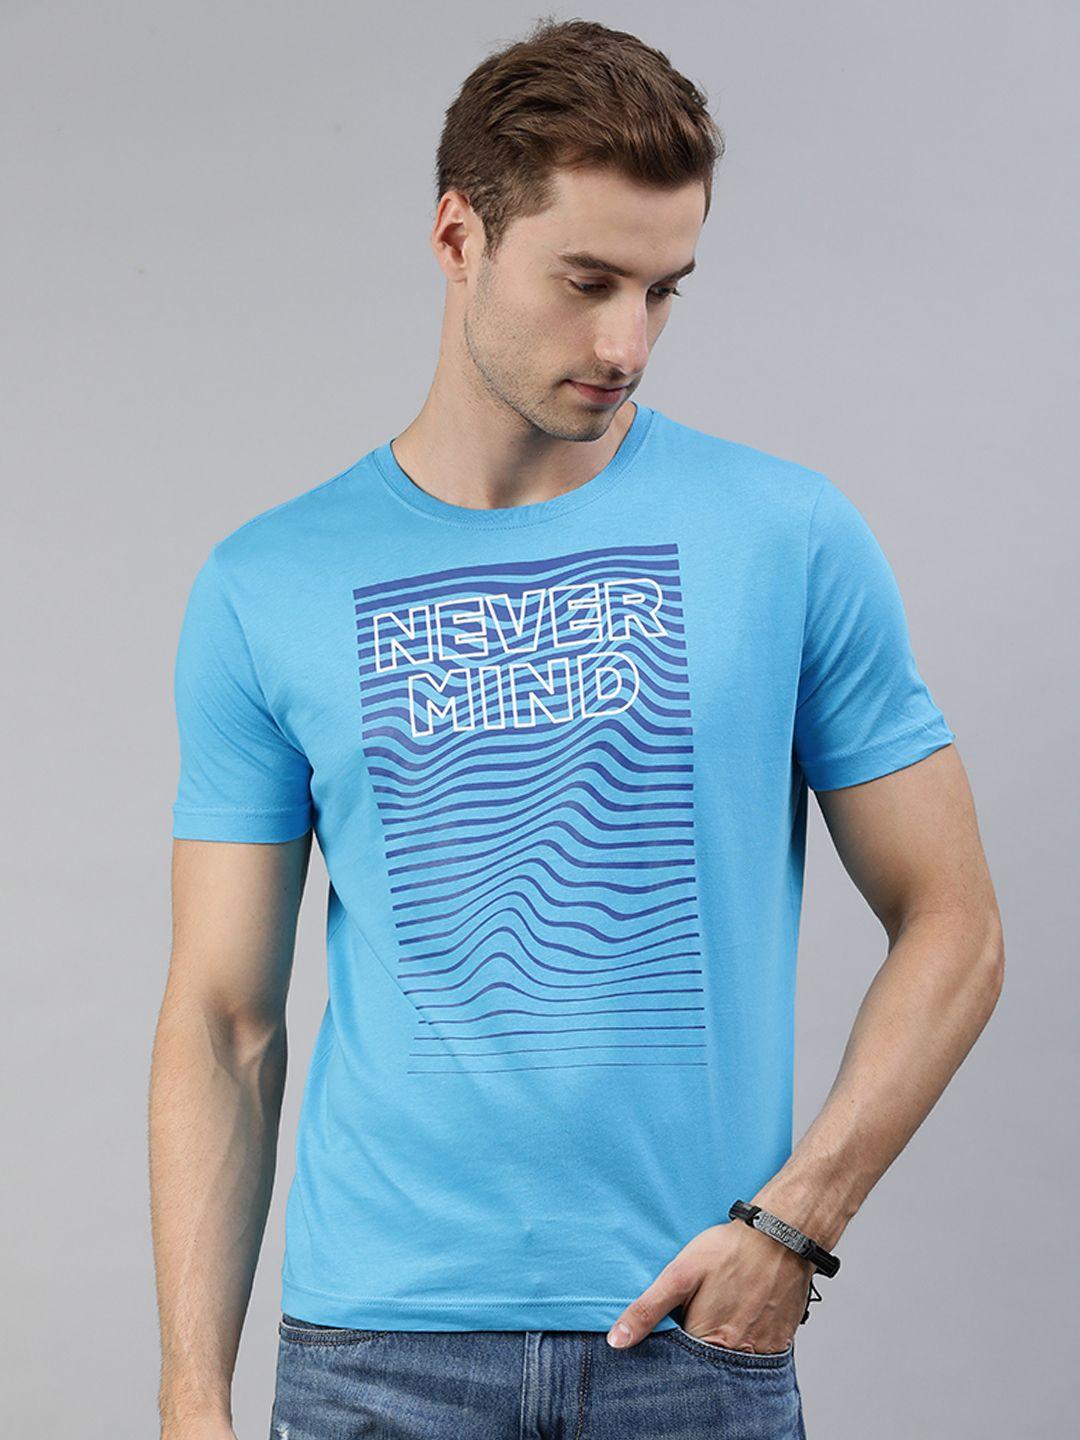 huetrap men turquoise blue typography printed pure cotton t-shirt